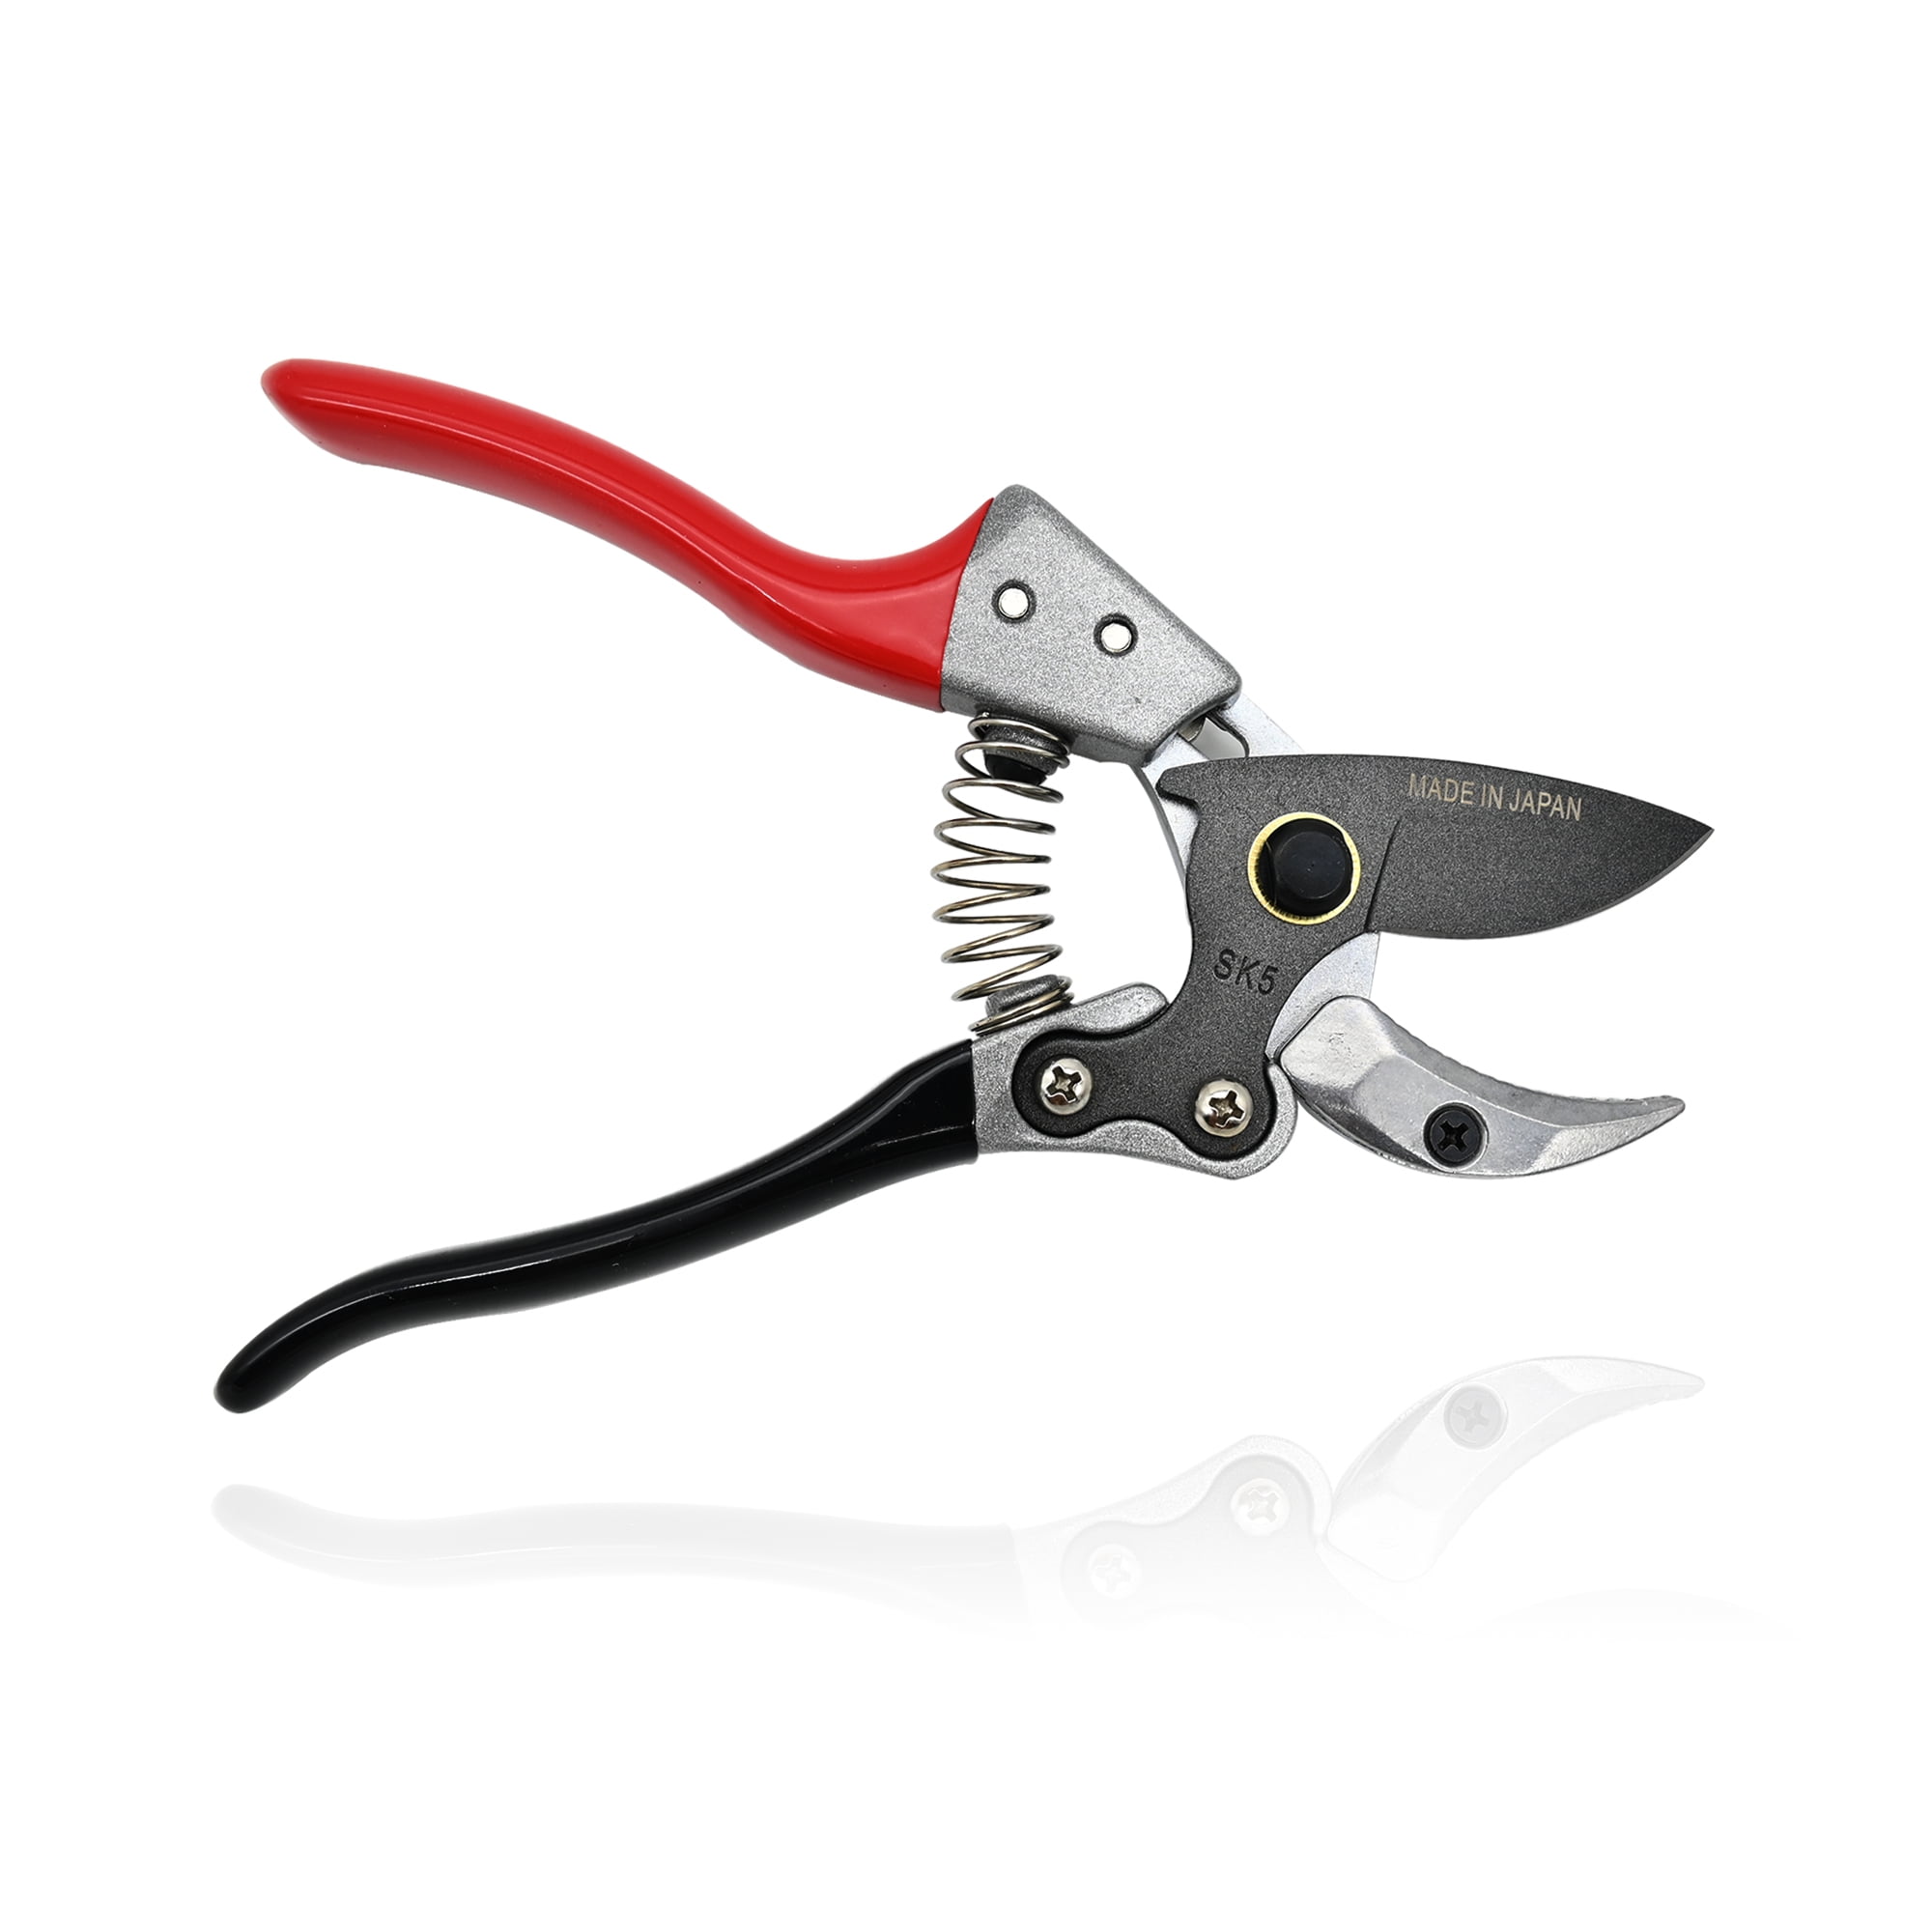 TOOLMOOM Garden Shears Professional Hand Pruners, Heavy Duty Bypass Pruning Shears (Red)